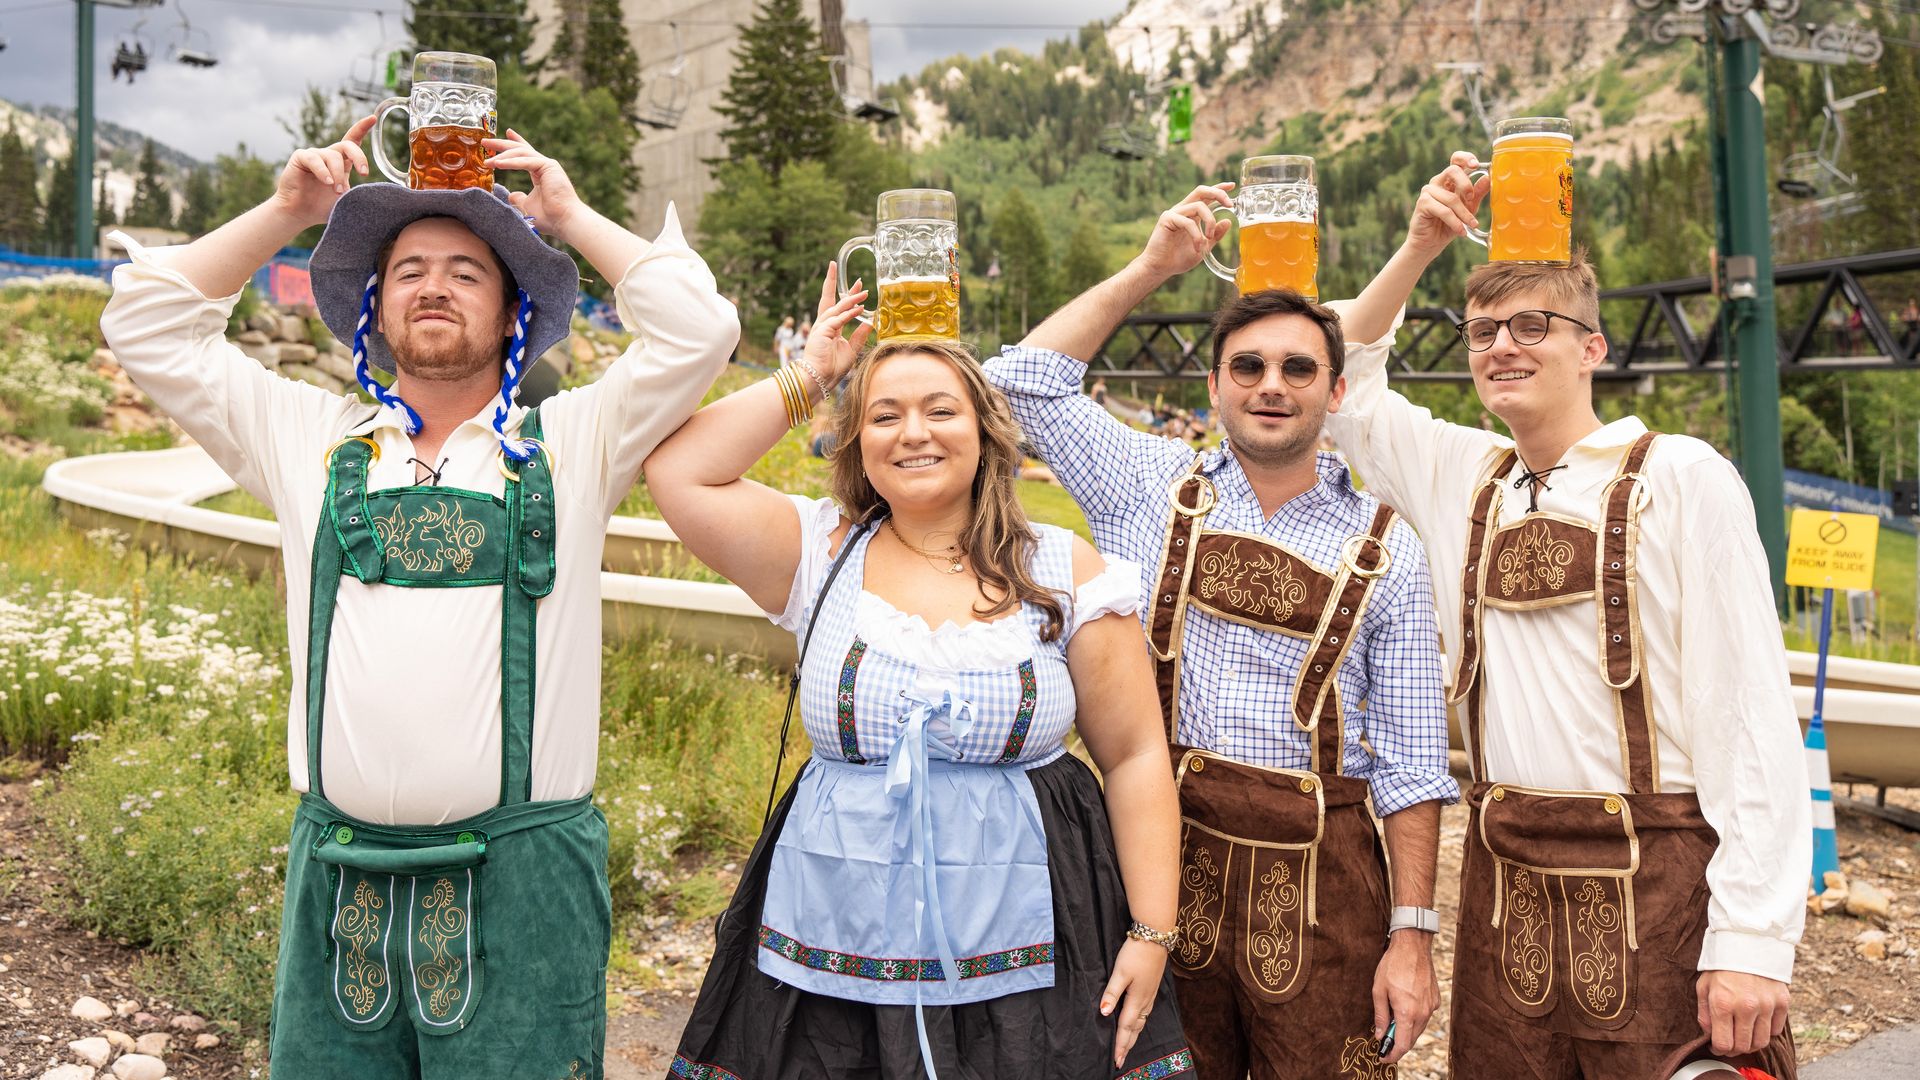 People holding beers over their heads during Oktoberfest.